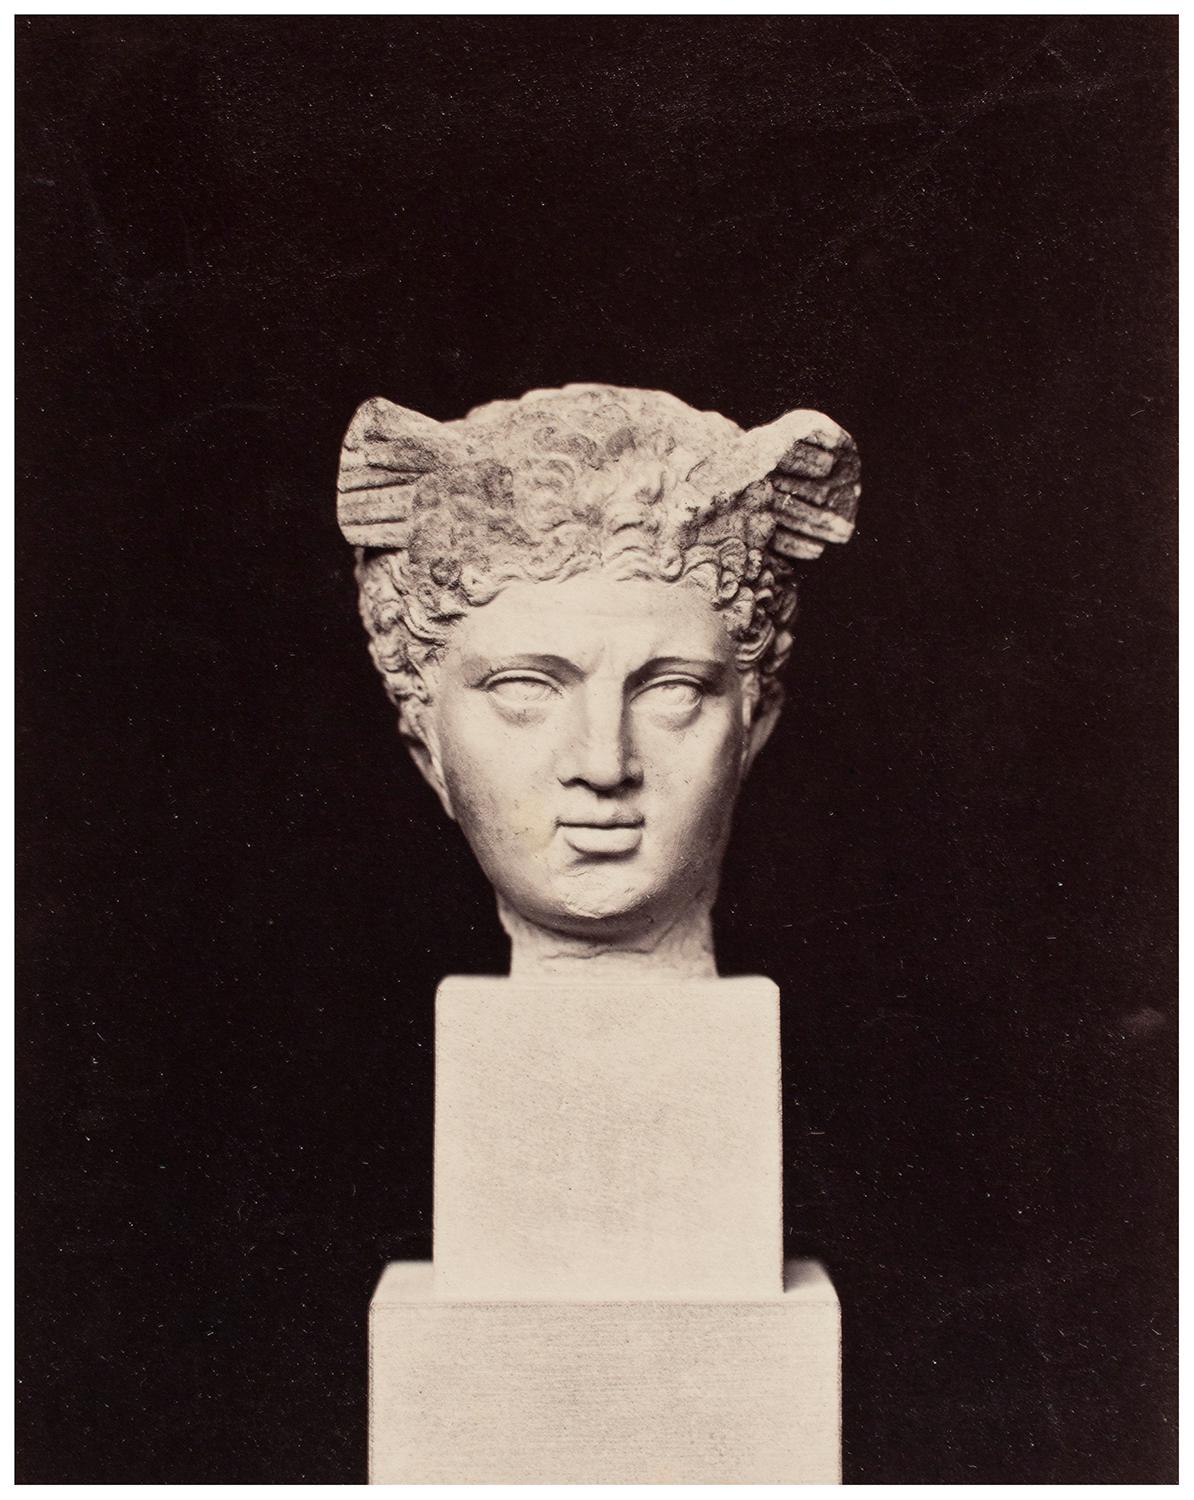 A stone bust shown against a black backdrop. Photograph by Francis Bedford.